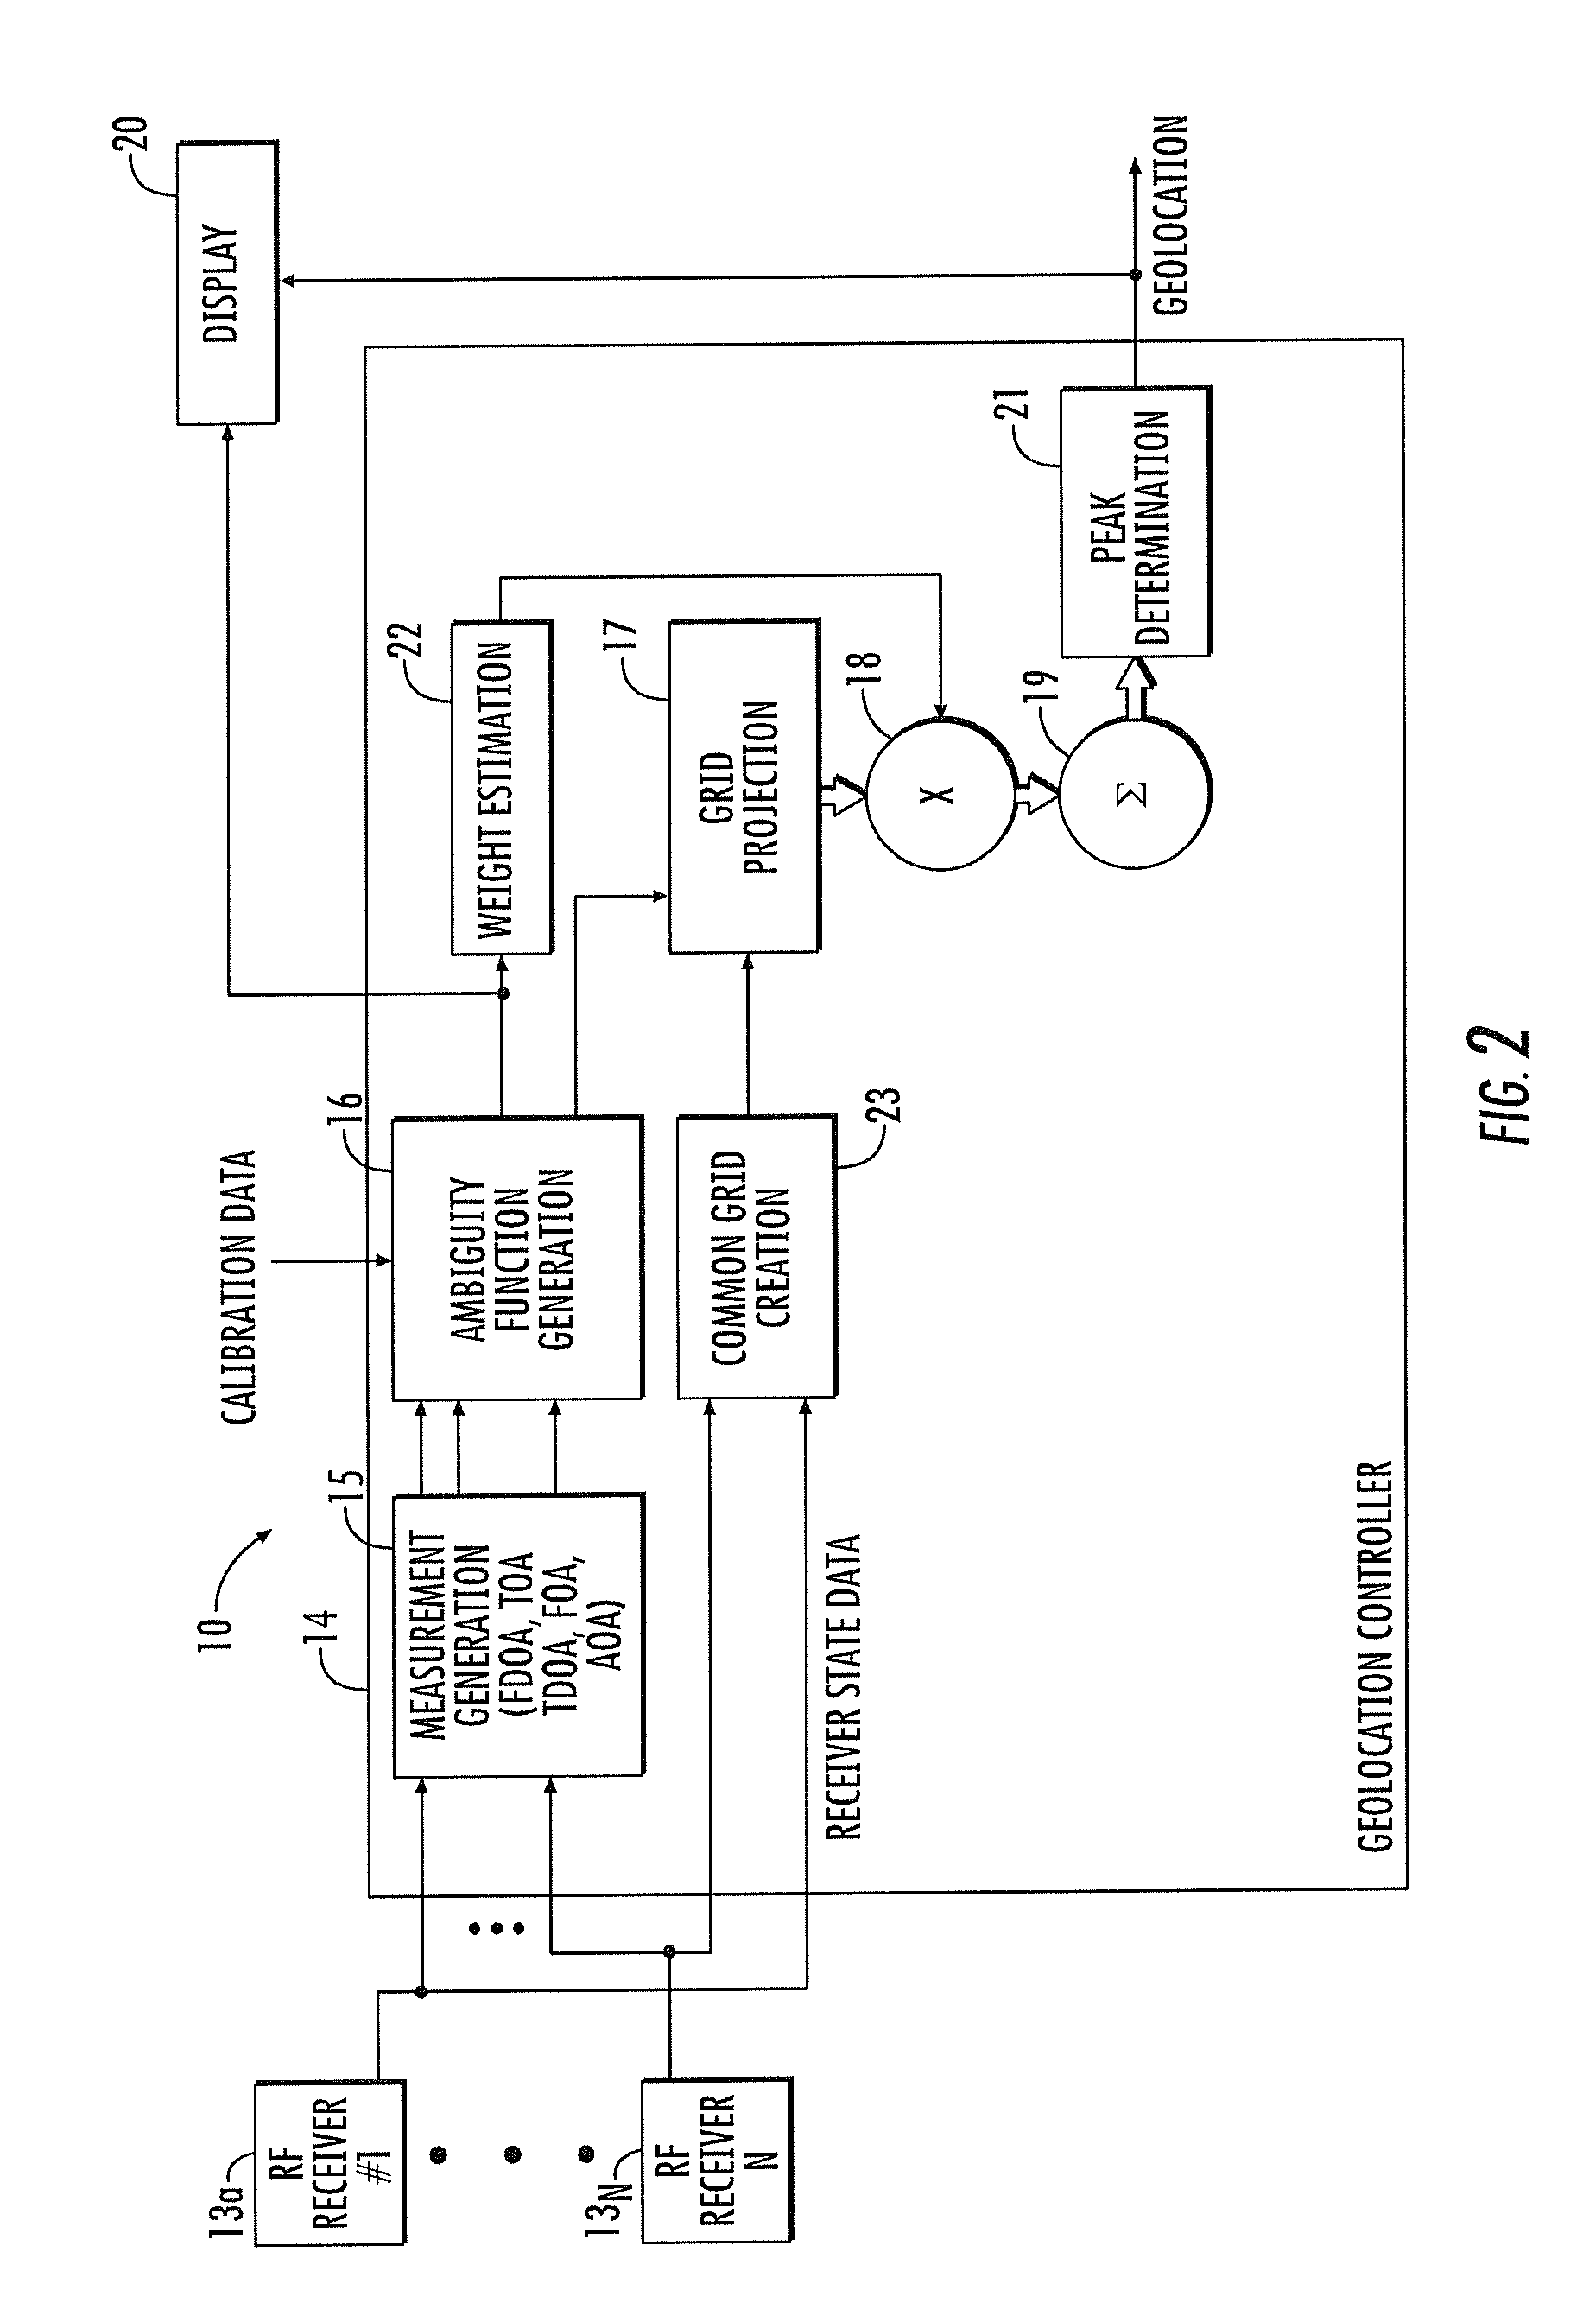 RF transmitter geolocation system and related methods